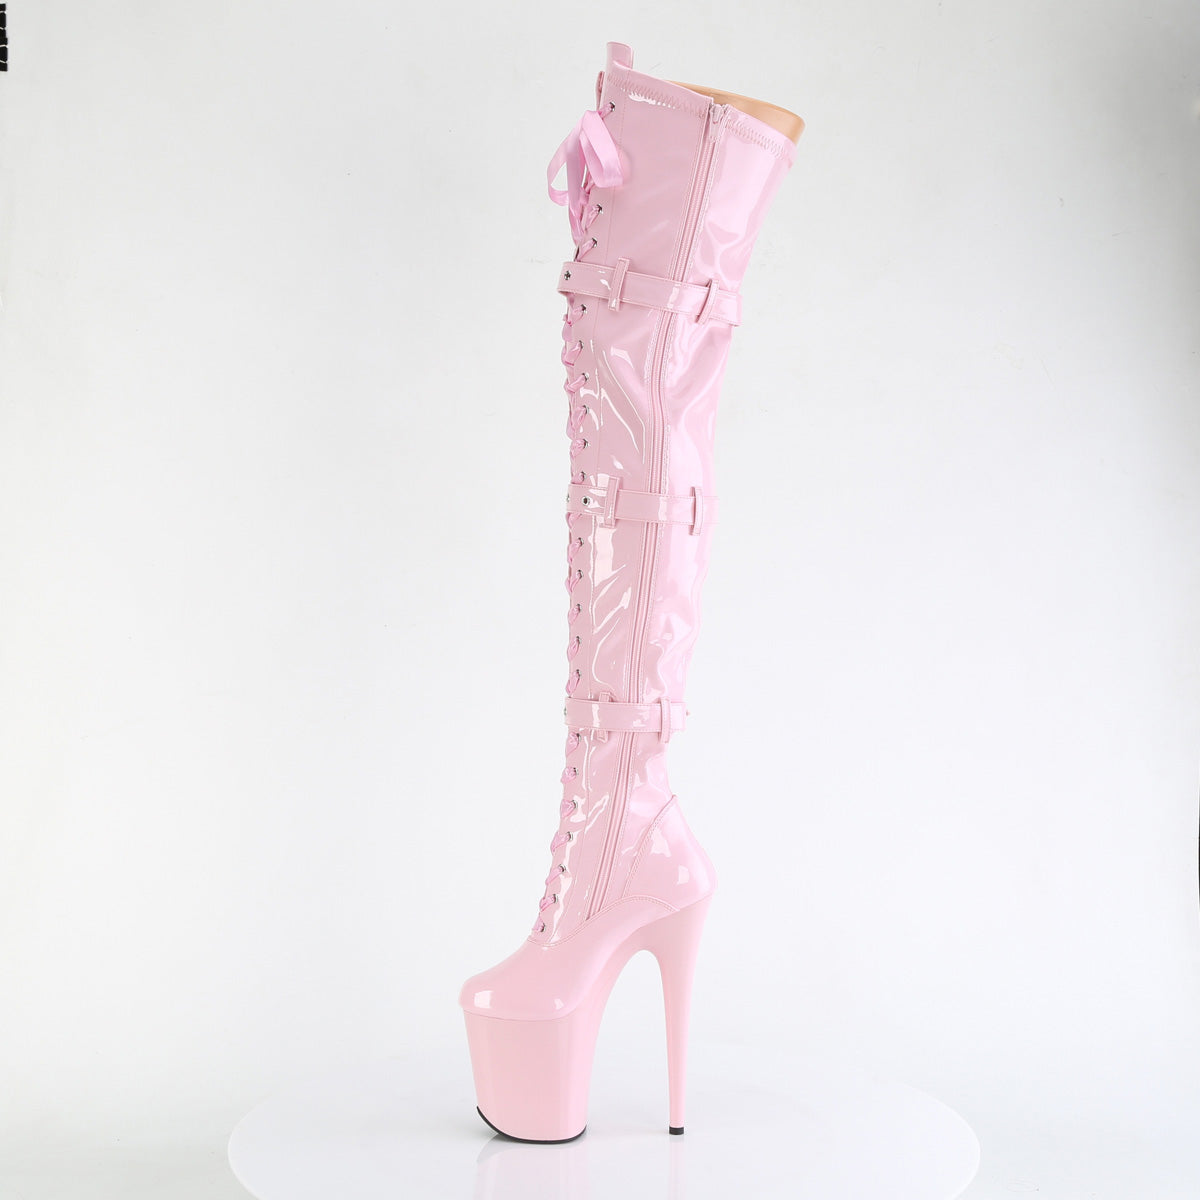 PLEASER FLAMINGO-3028 BABY PINK 8 INCH HIGH HEEL THIGH HIGH BOOTS SIZE 9